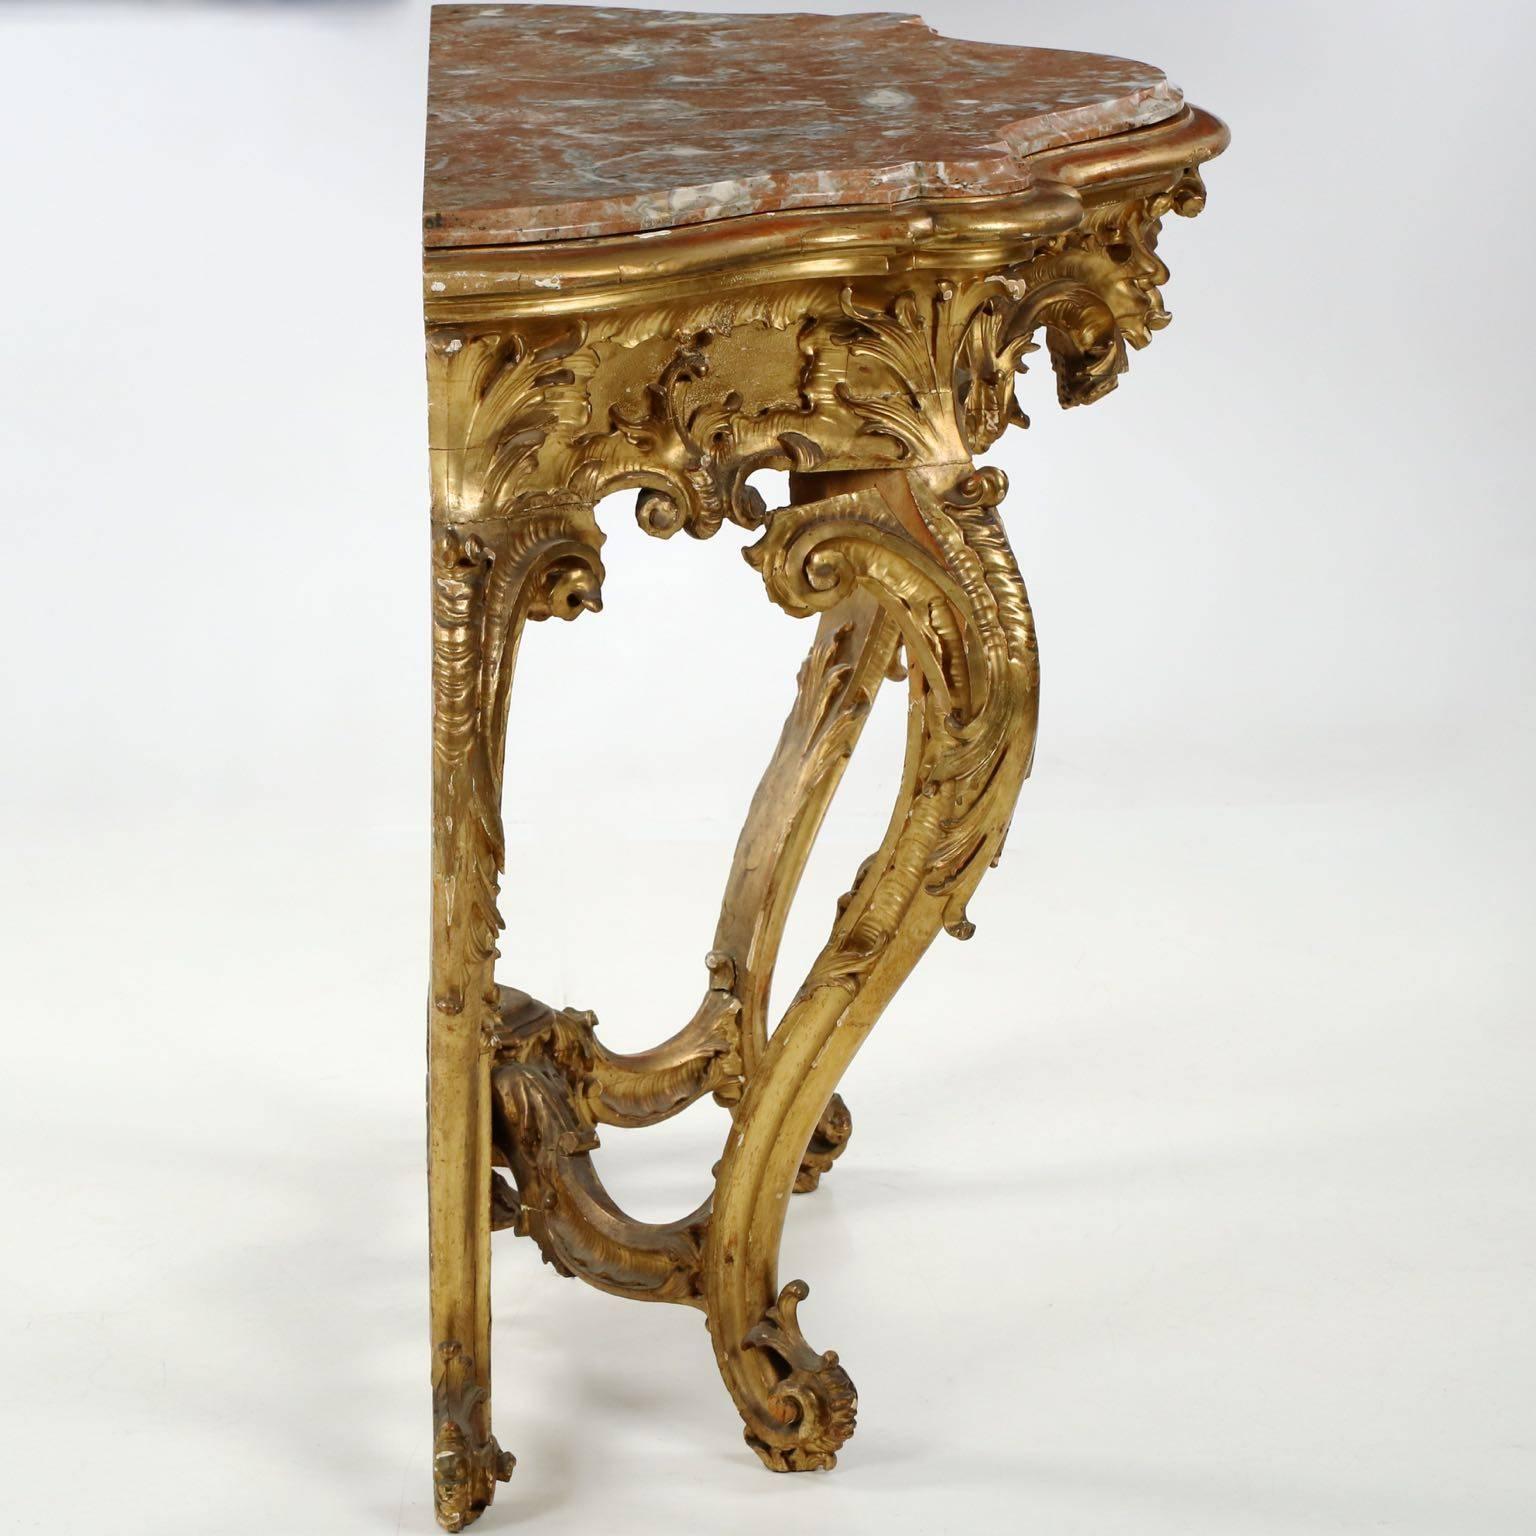 European Carved Giltwood Red Marble-Top Console Table in Louis XV Taste, 19th Century